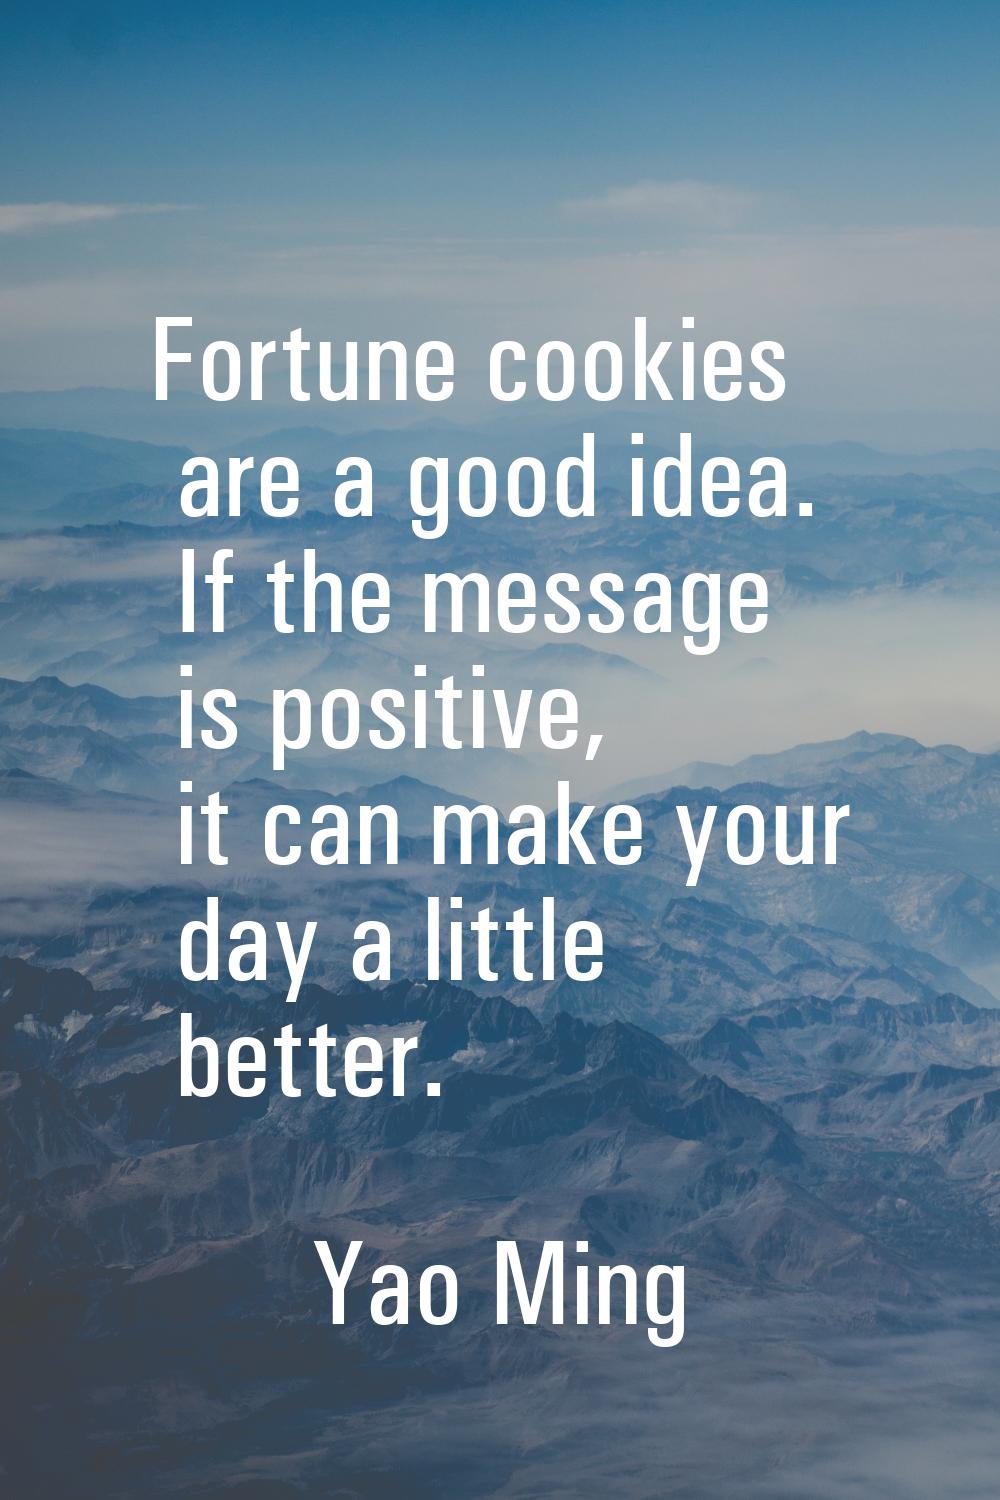 Fortune cookies are a good idea. If the message is positive, it can make your day a little better.